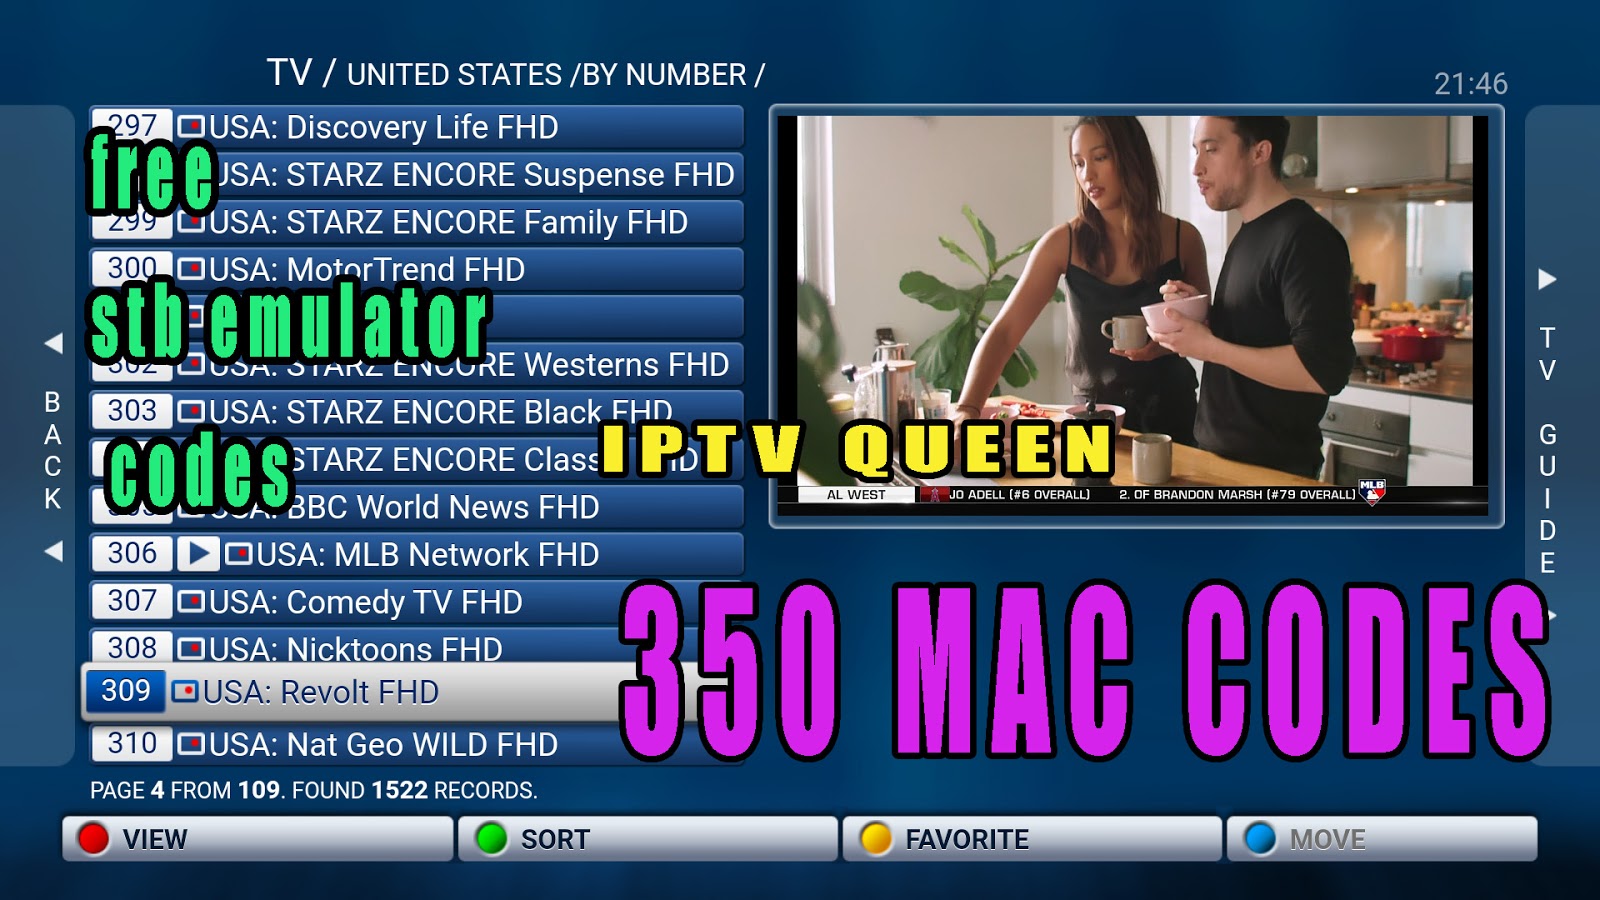 activate mac address from stb emulator